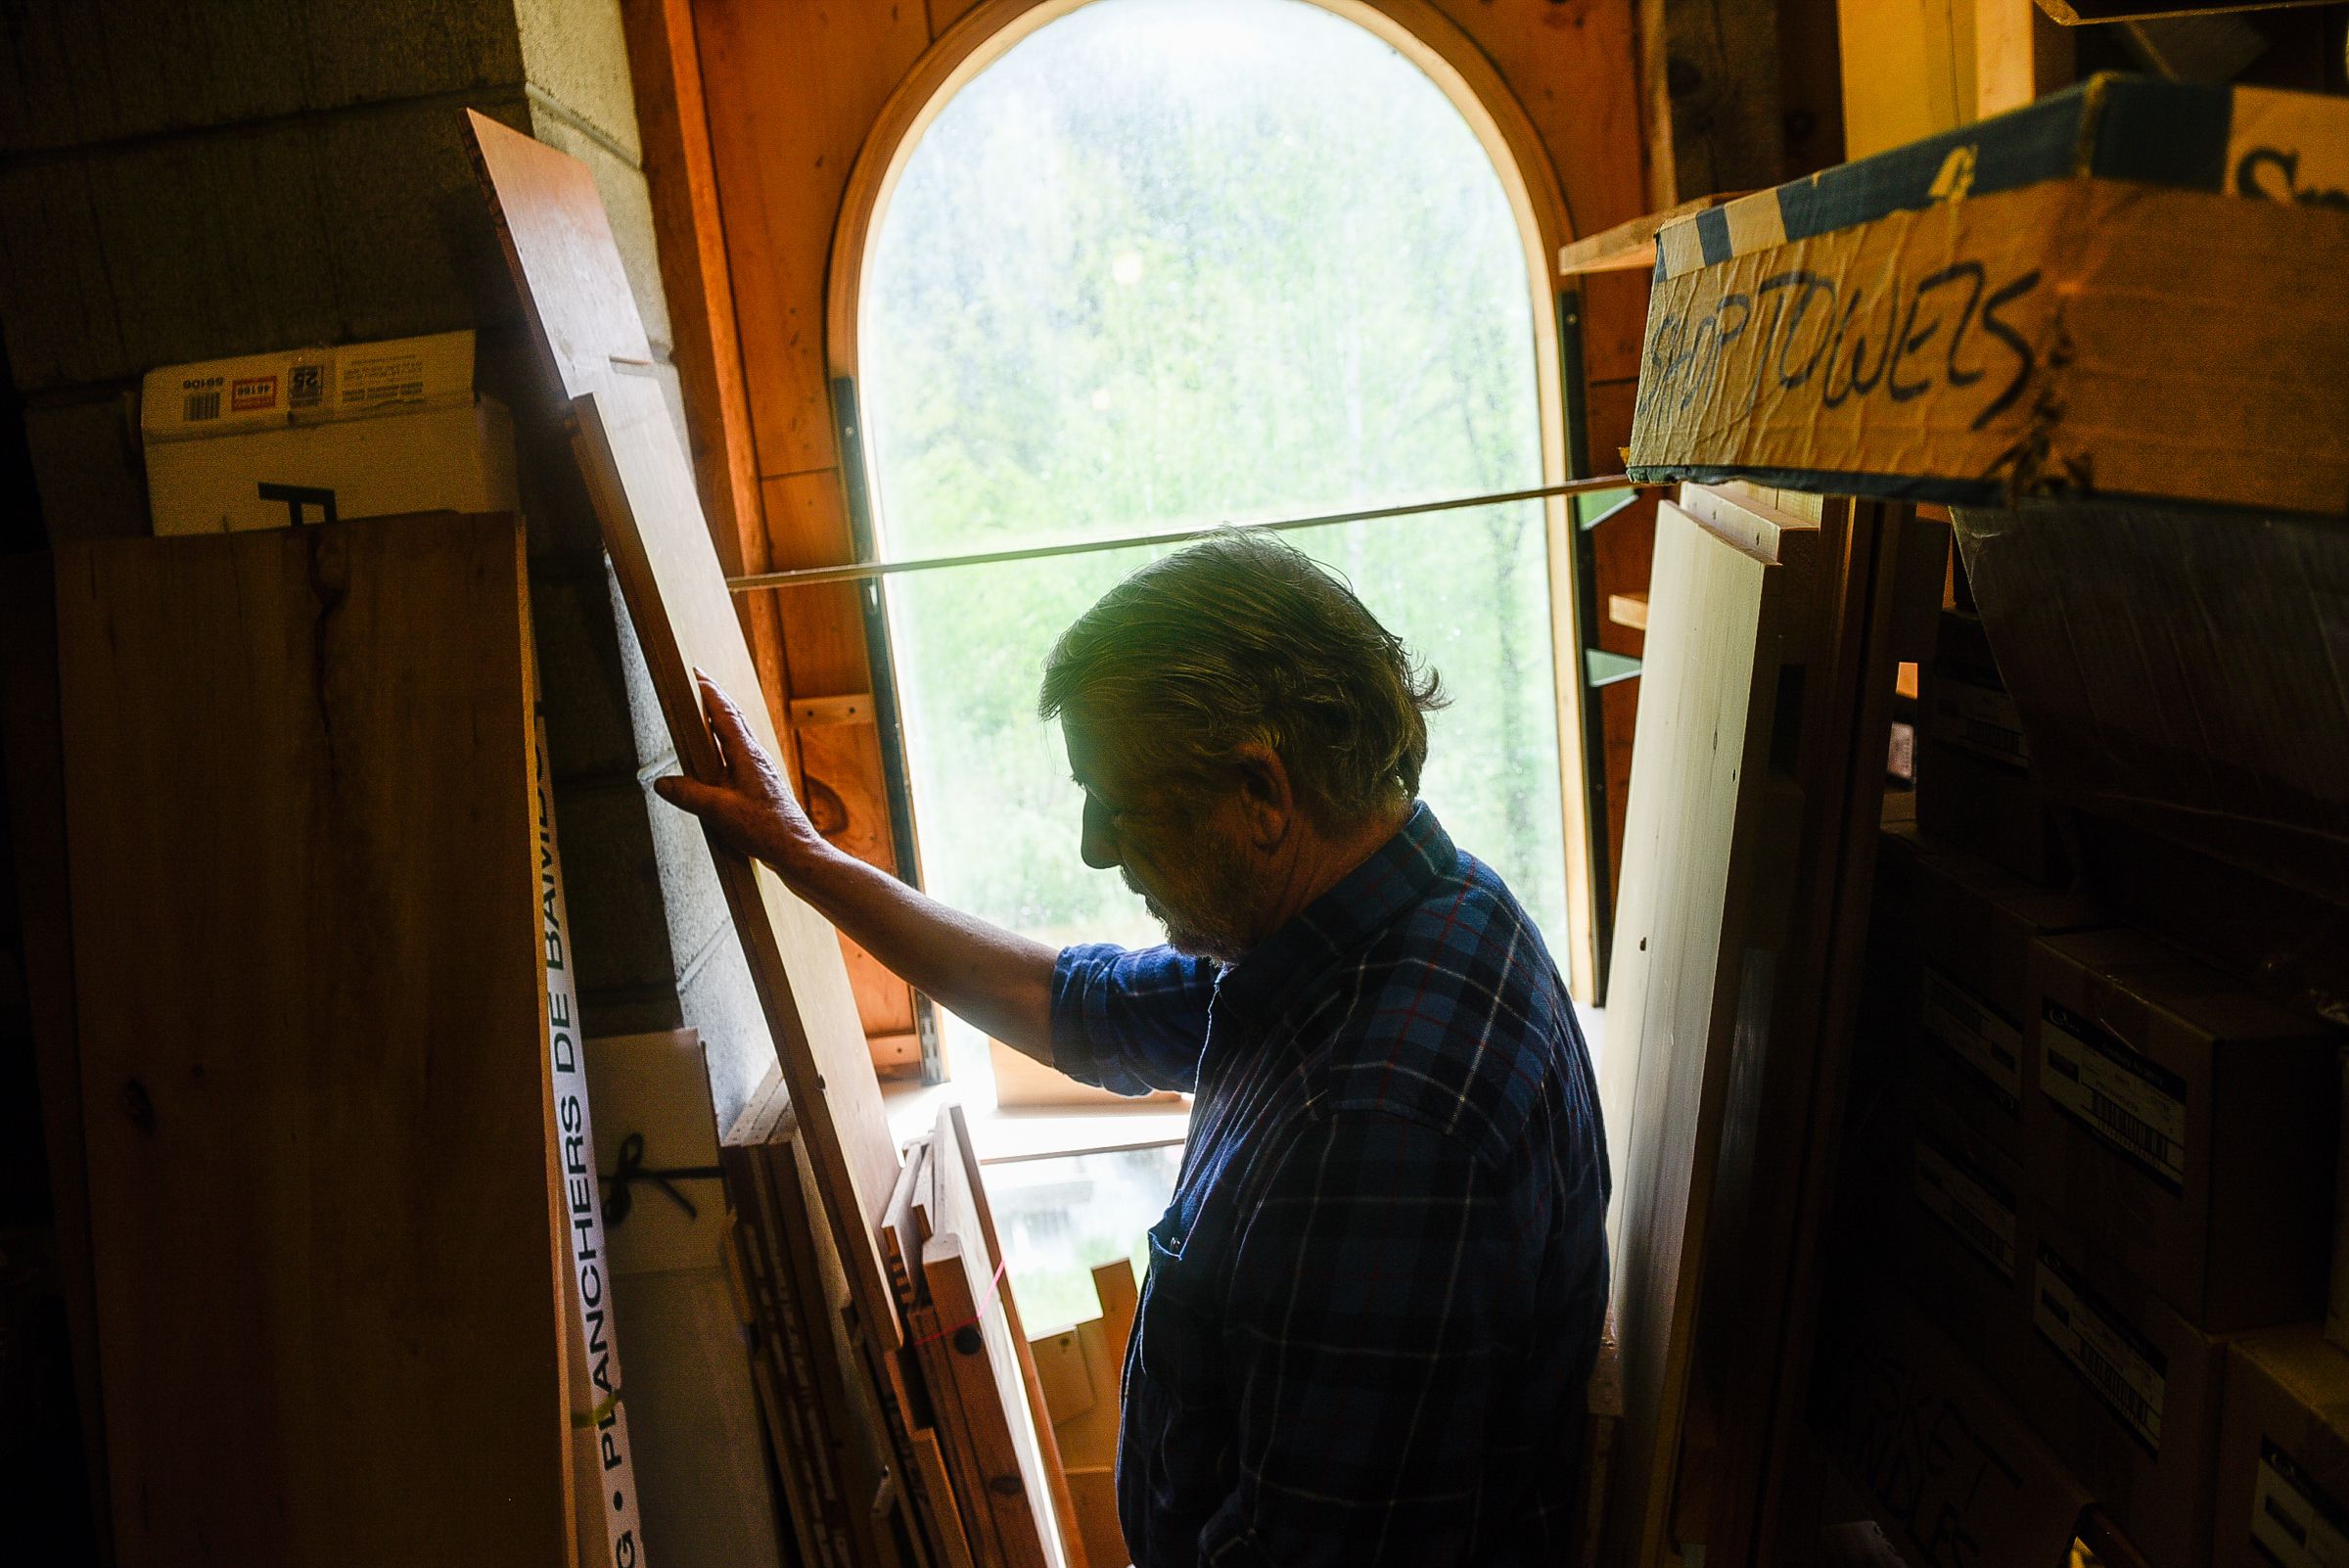 Michael Whitman, a volunteer educator with the nonprofit Funeral Consumers Alliance, at his Lyme, N.H. woodworking shop on Sunday, May 21, 2017. Whitman crafts a few simple wooden caskets annually. (Valley News - Jovelle Tamayo) Copyright Valley News. May not be reprinted or used online without permission. Send requests to permission@vnews.com.